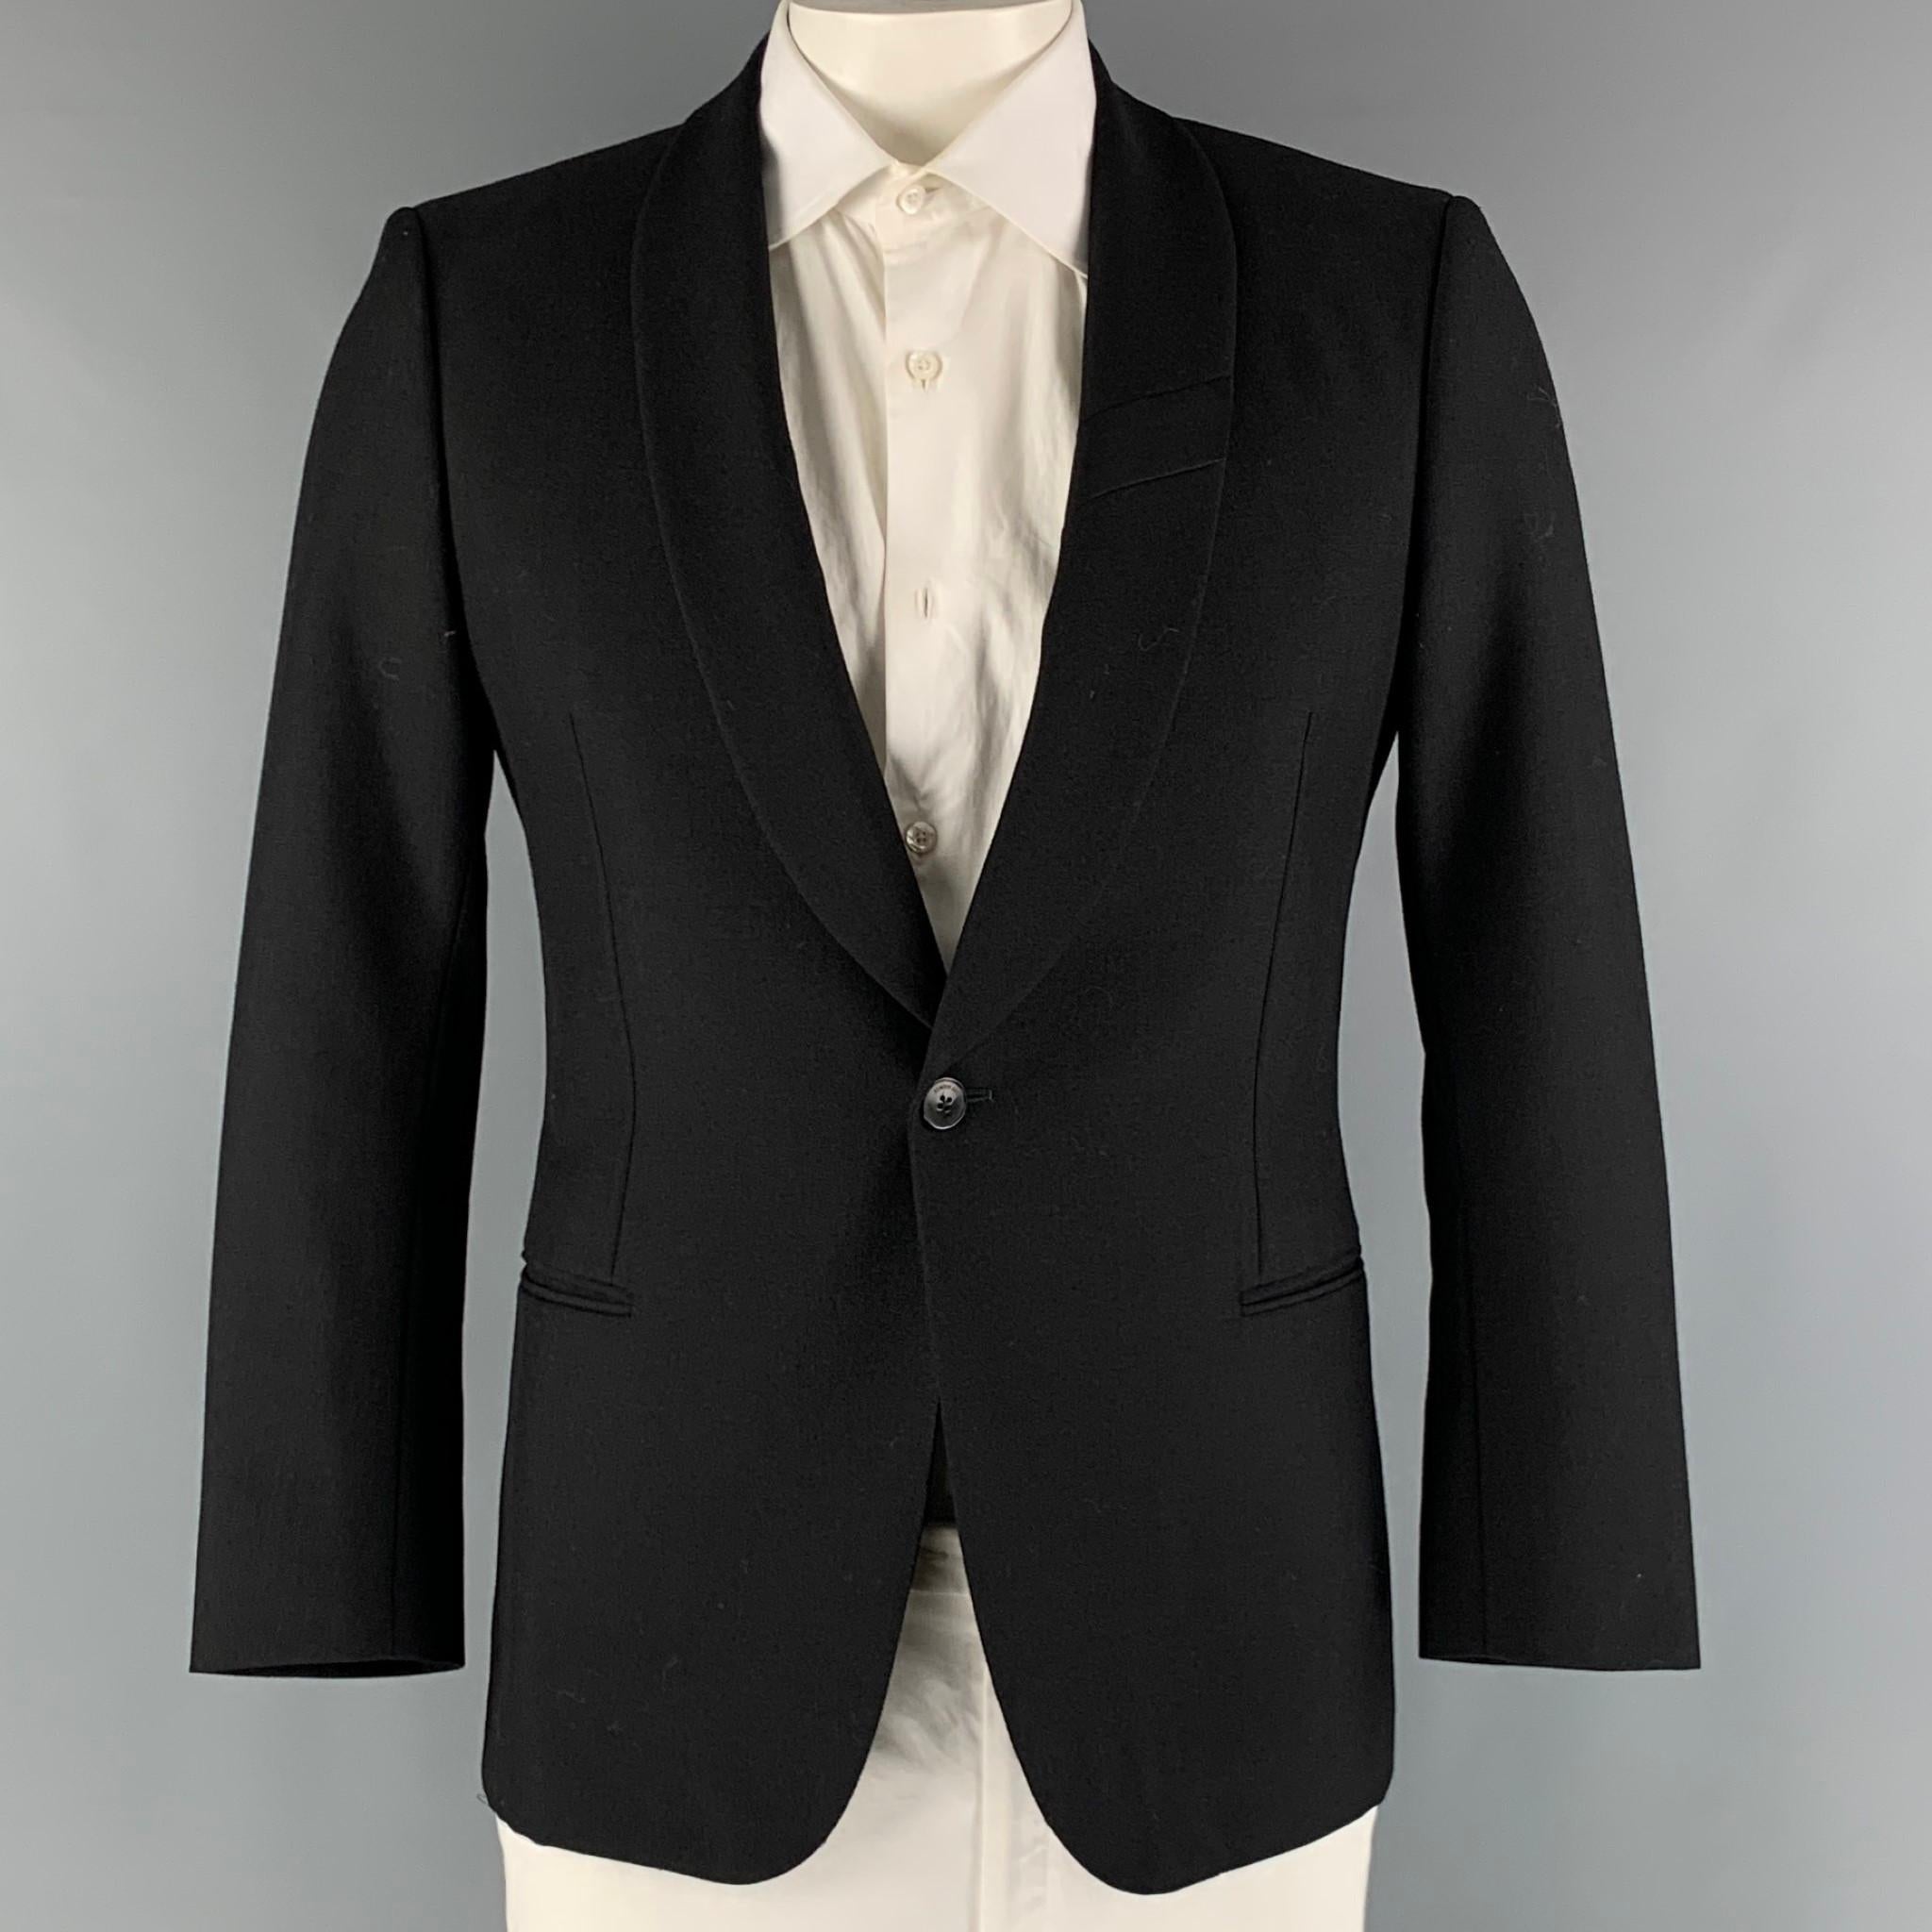 SIMON SPURR sport coat comes in a black wool and mohair woven material featuring a shawl collar, welt pockets, and a single button closure.

Very Good Pre-Owned Condition. AS IS.
Marked: 52

Measurements:

Shoulder: 18 in.
Chest: 40 in.
Sleeve: 24.5